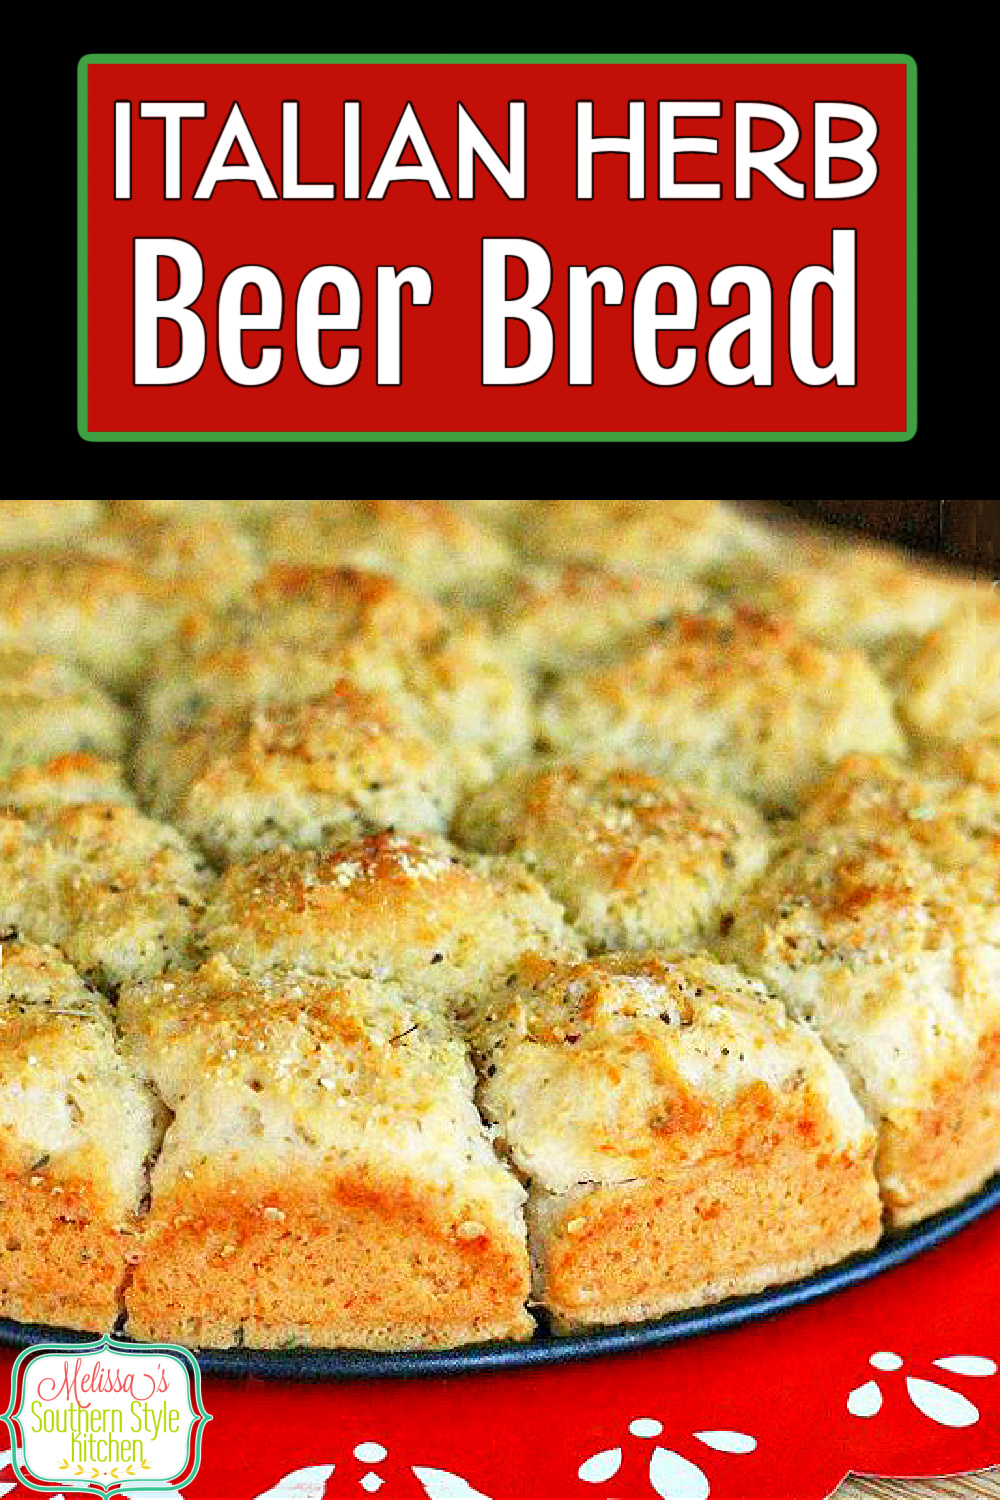 No yeast needed to make this pull apart Italian Herb Beer Bread #beerbread #pullapartbread #breadrecipes #beer #bread #Italianbreadrecipes #quickbreads #southernfood #southernrecipes via @melissasssk